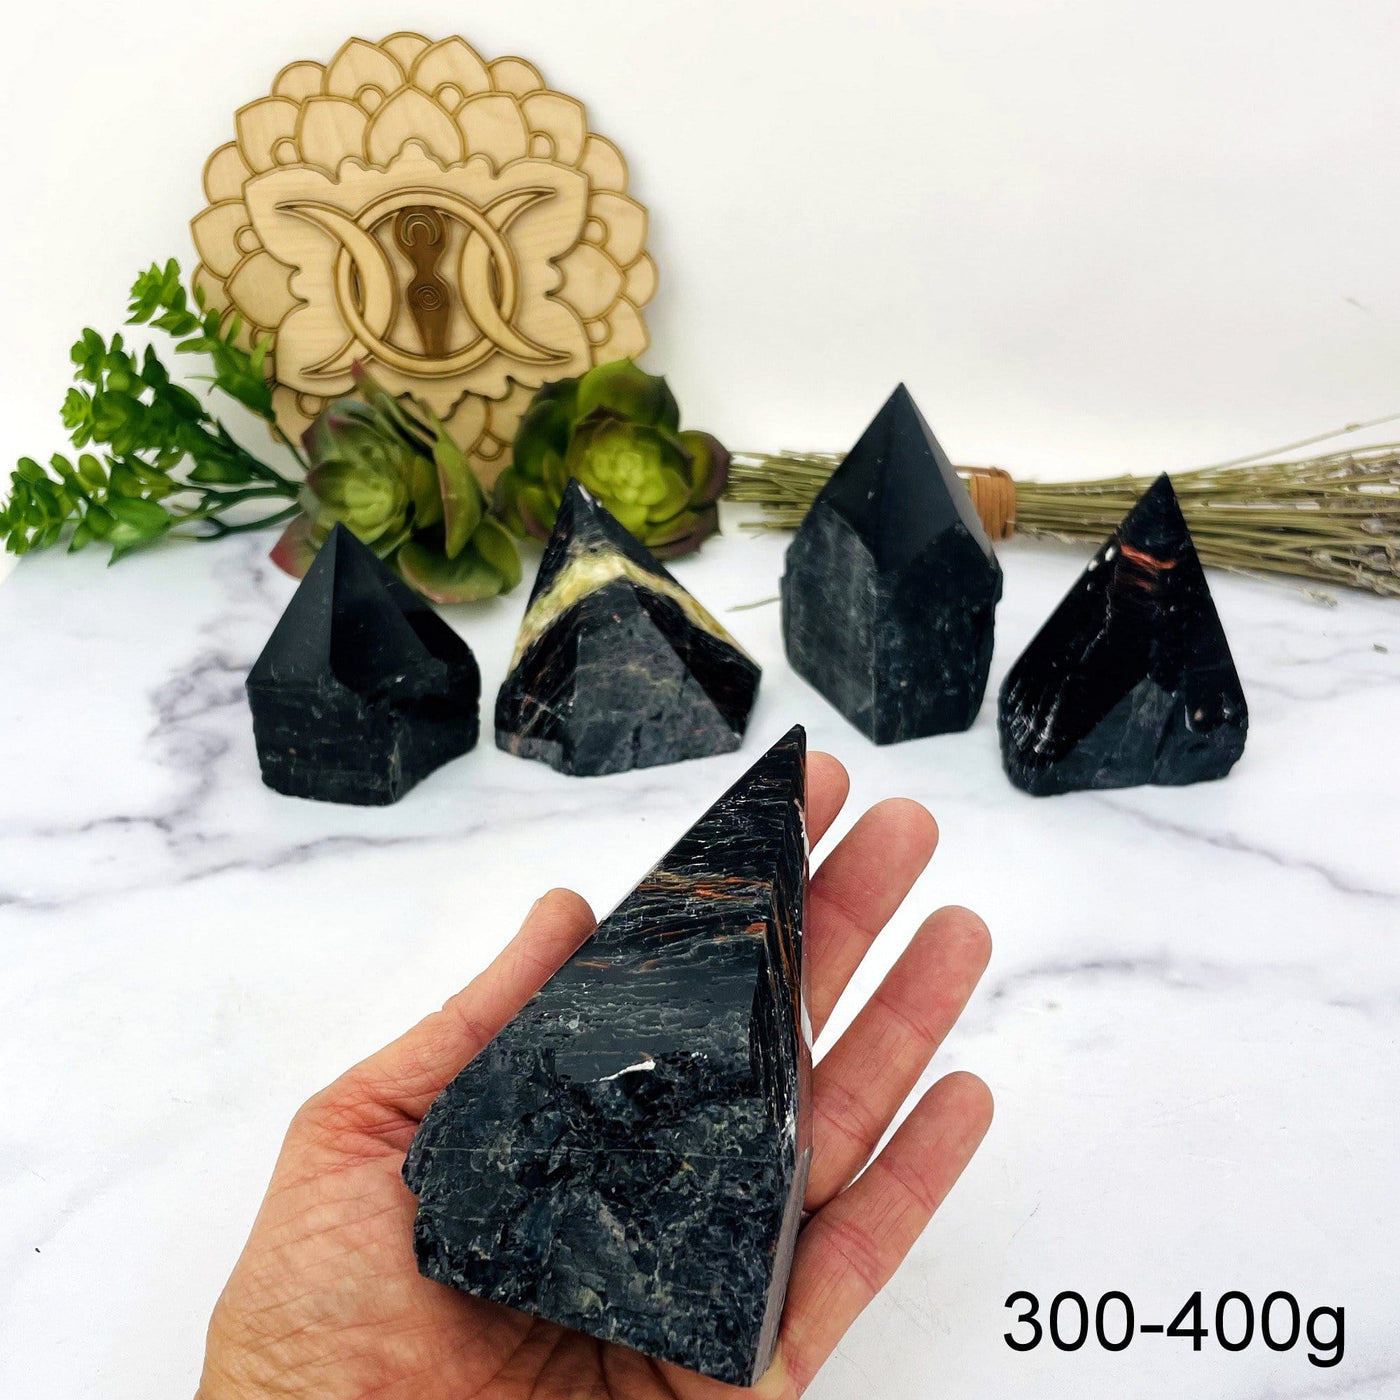 Black Tourmaline with Red Hematite Veins Semi Polished Points weight in 300-400g in hand for size reference